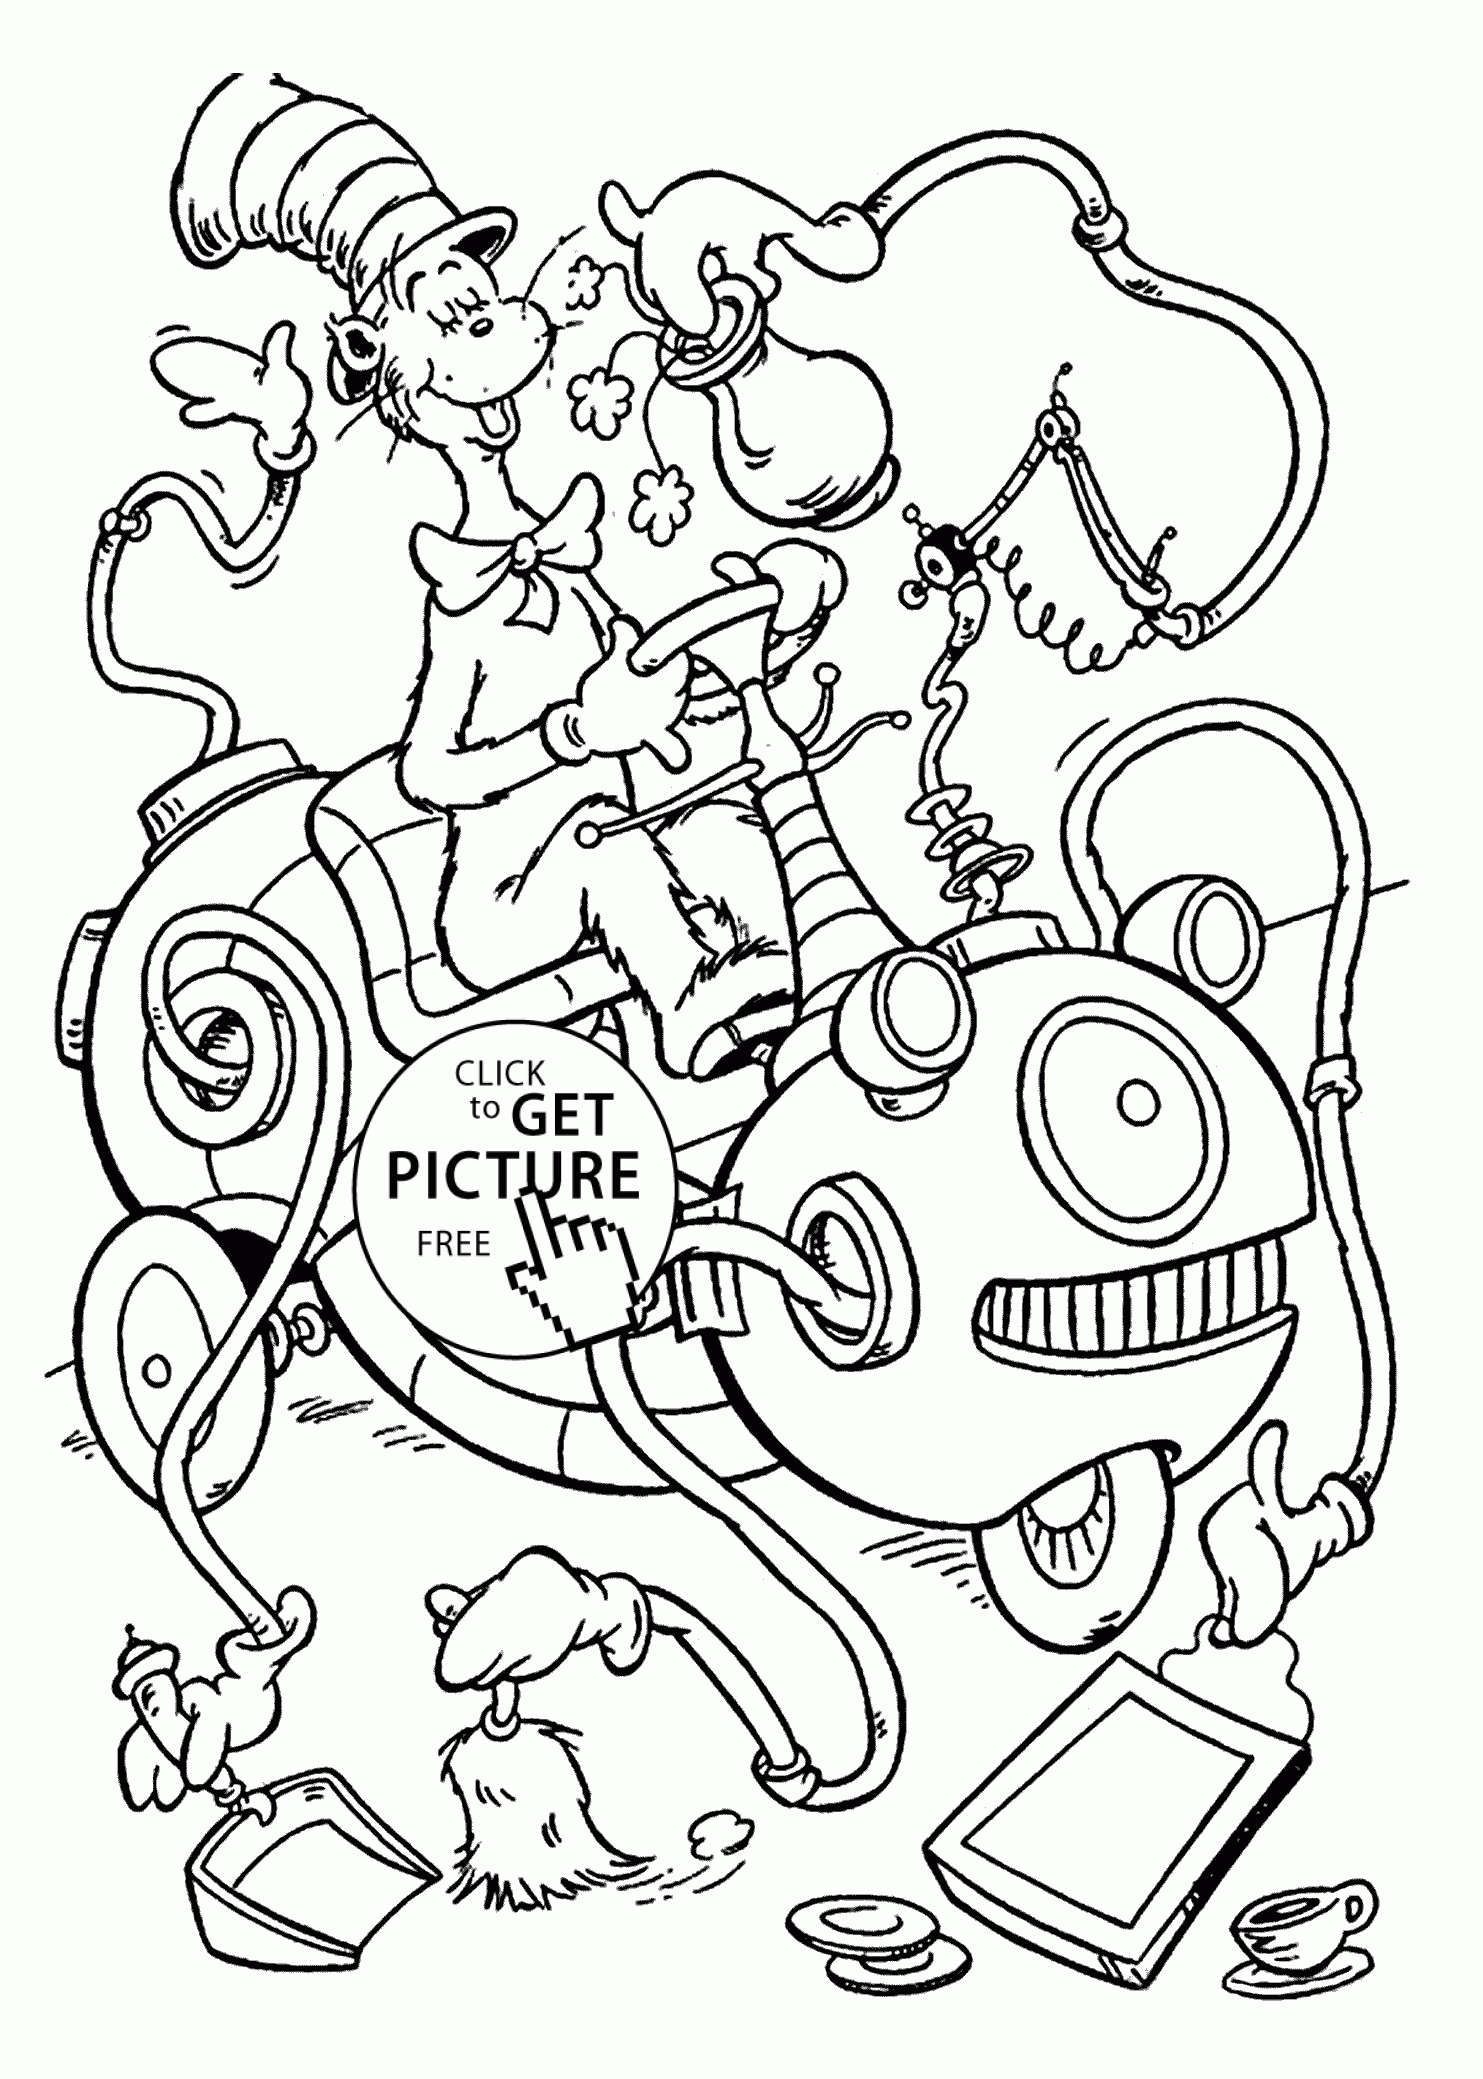 532 Unicorn Dr Suess Coloring Page with Printable